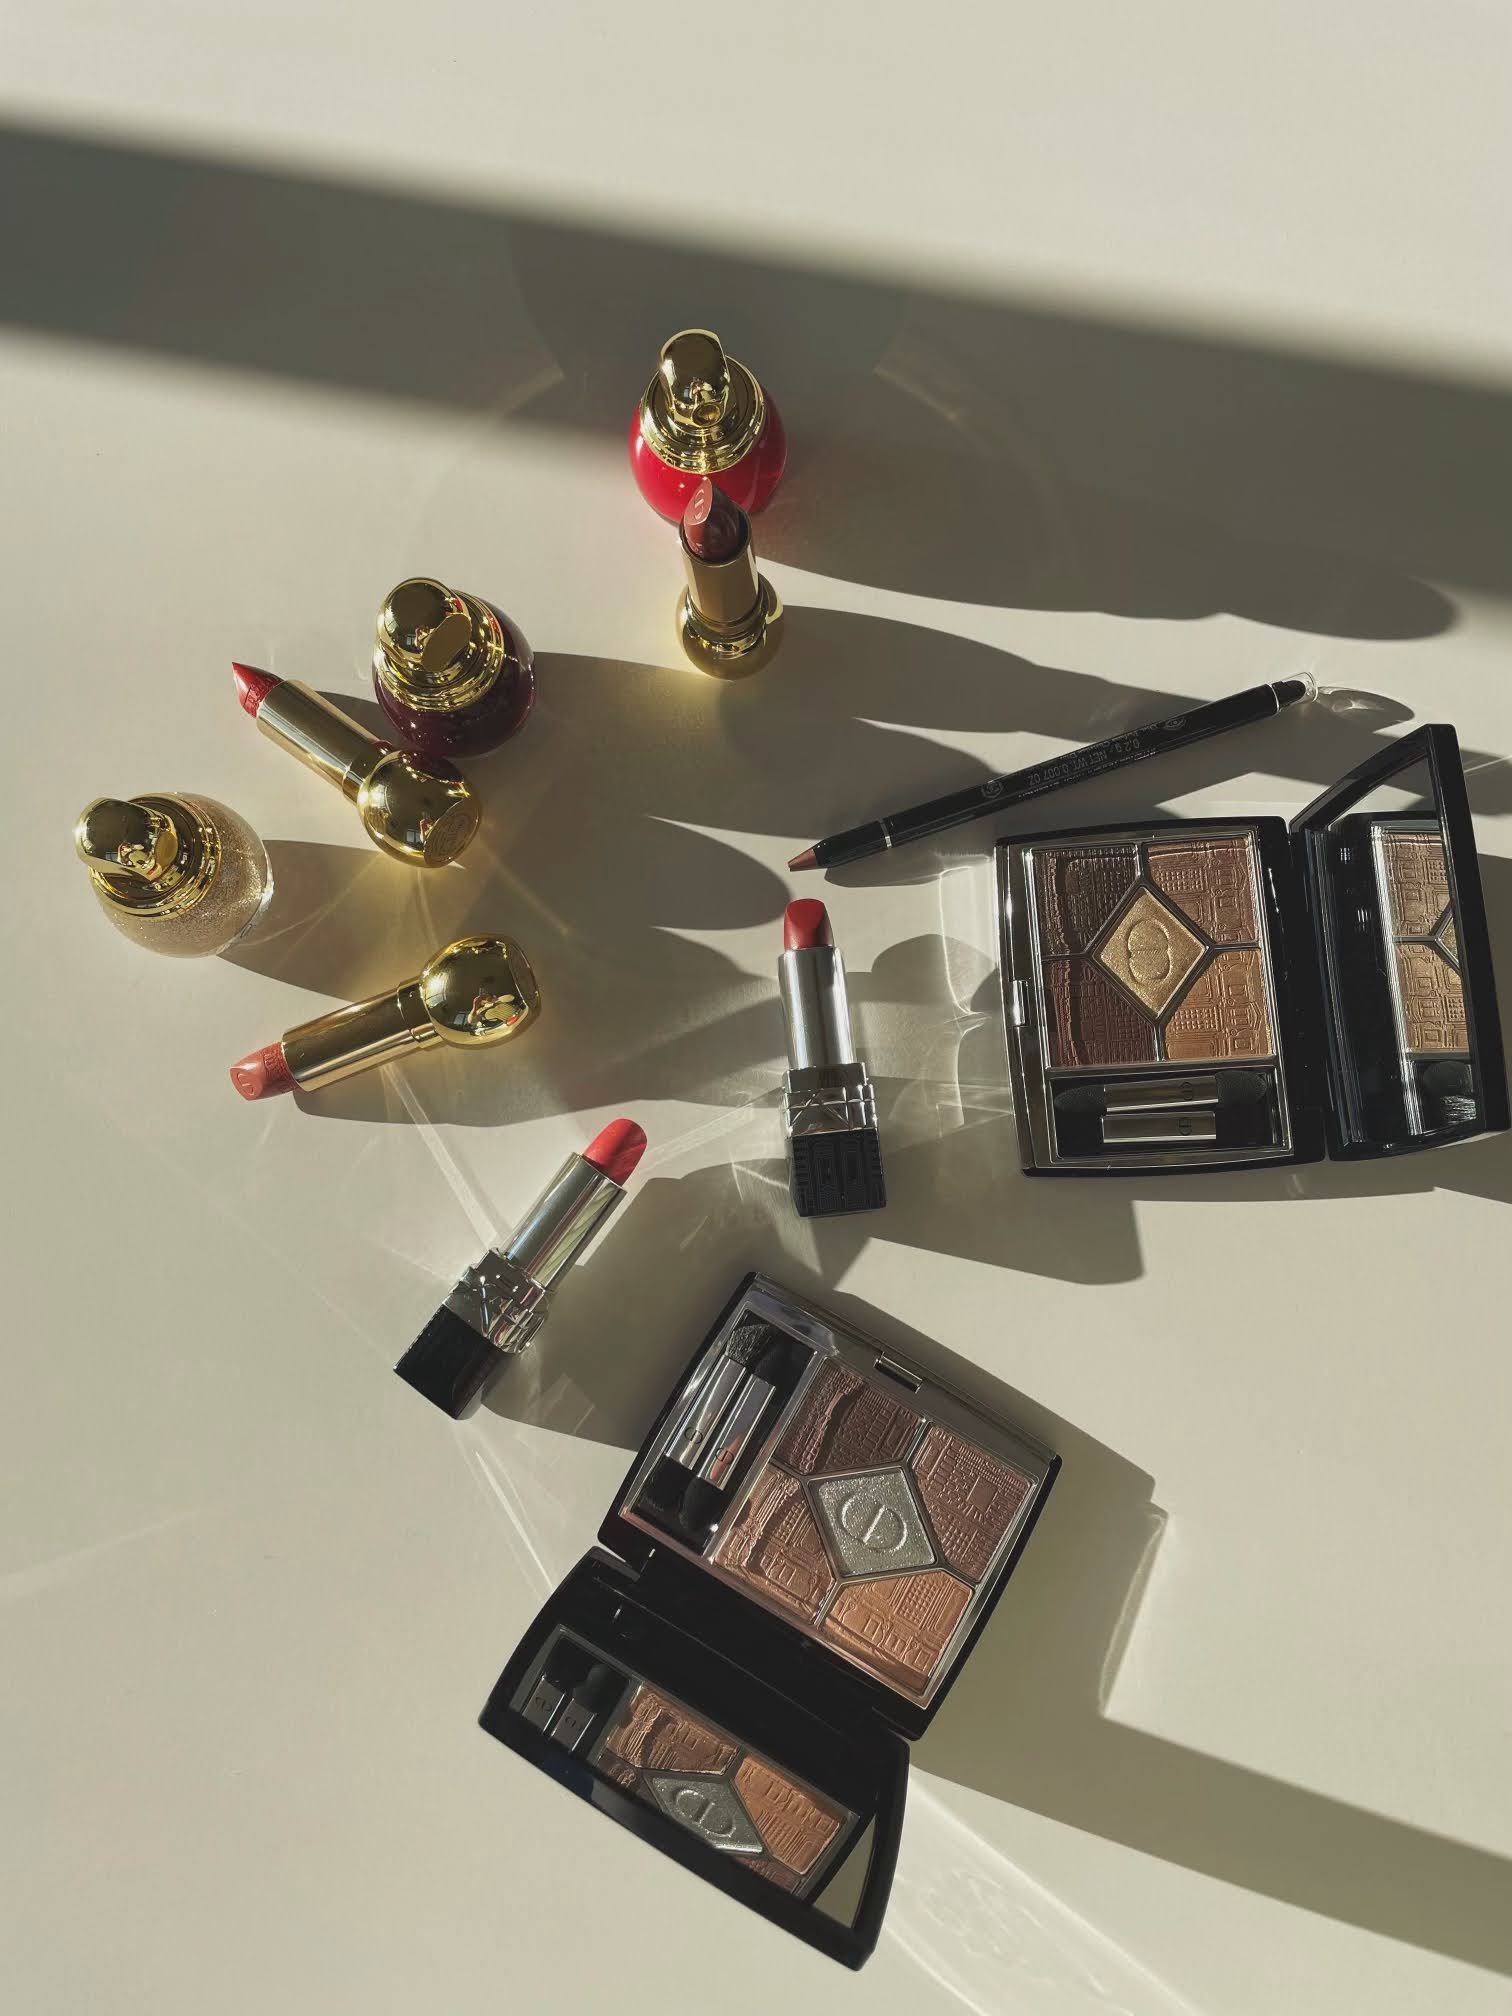 Dior The Atelier Of Dreams holiday collection: A quick review